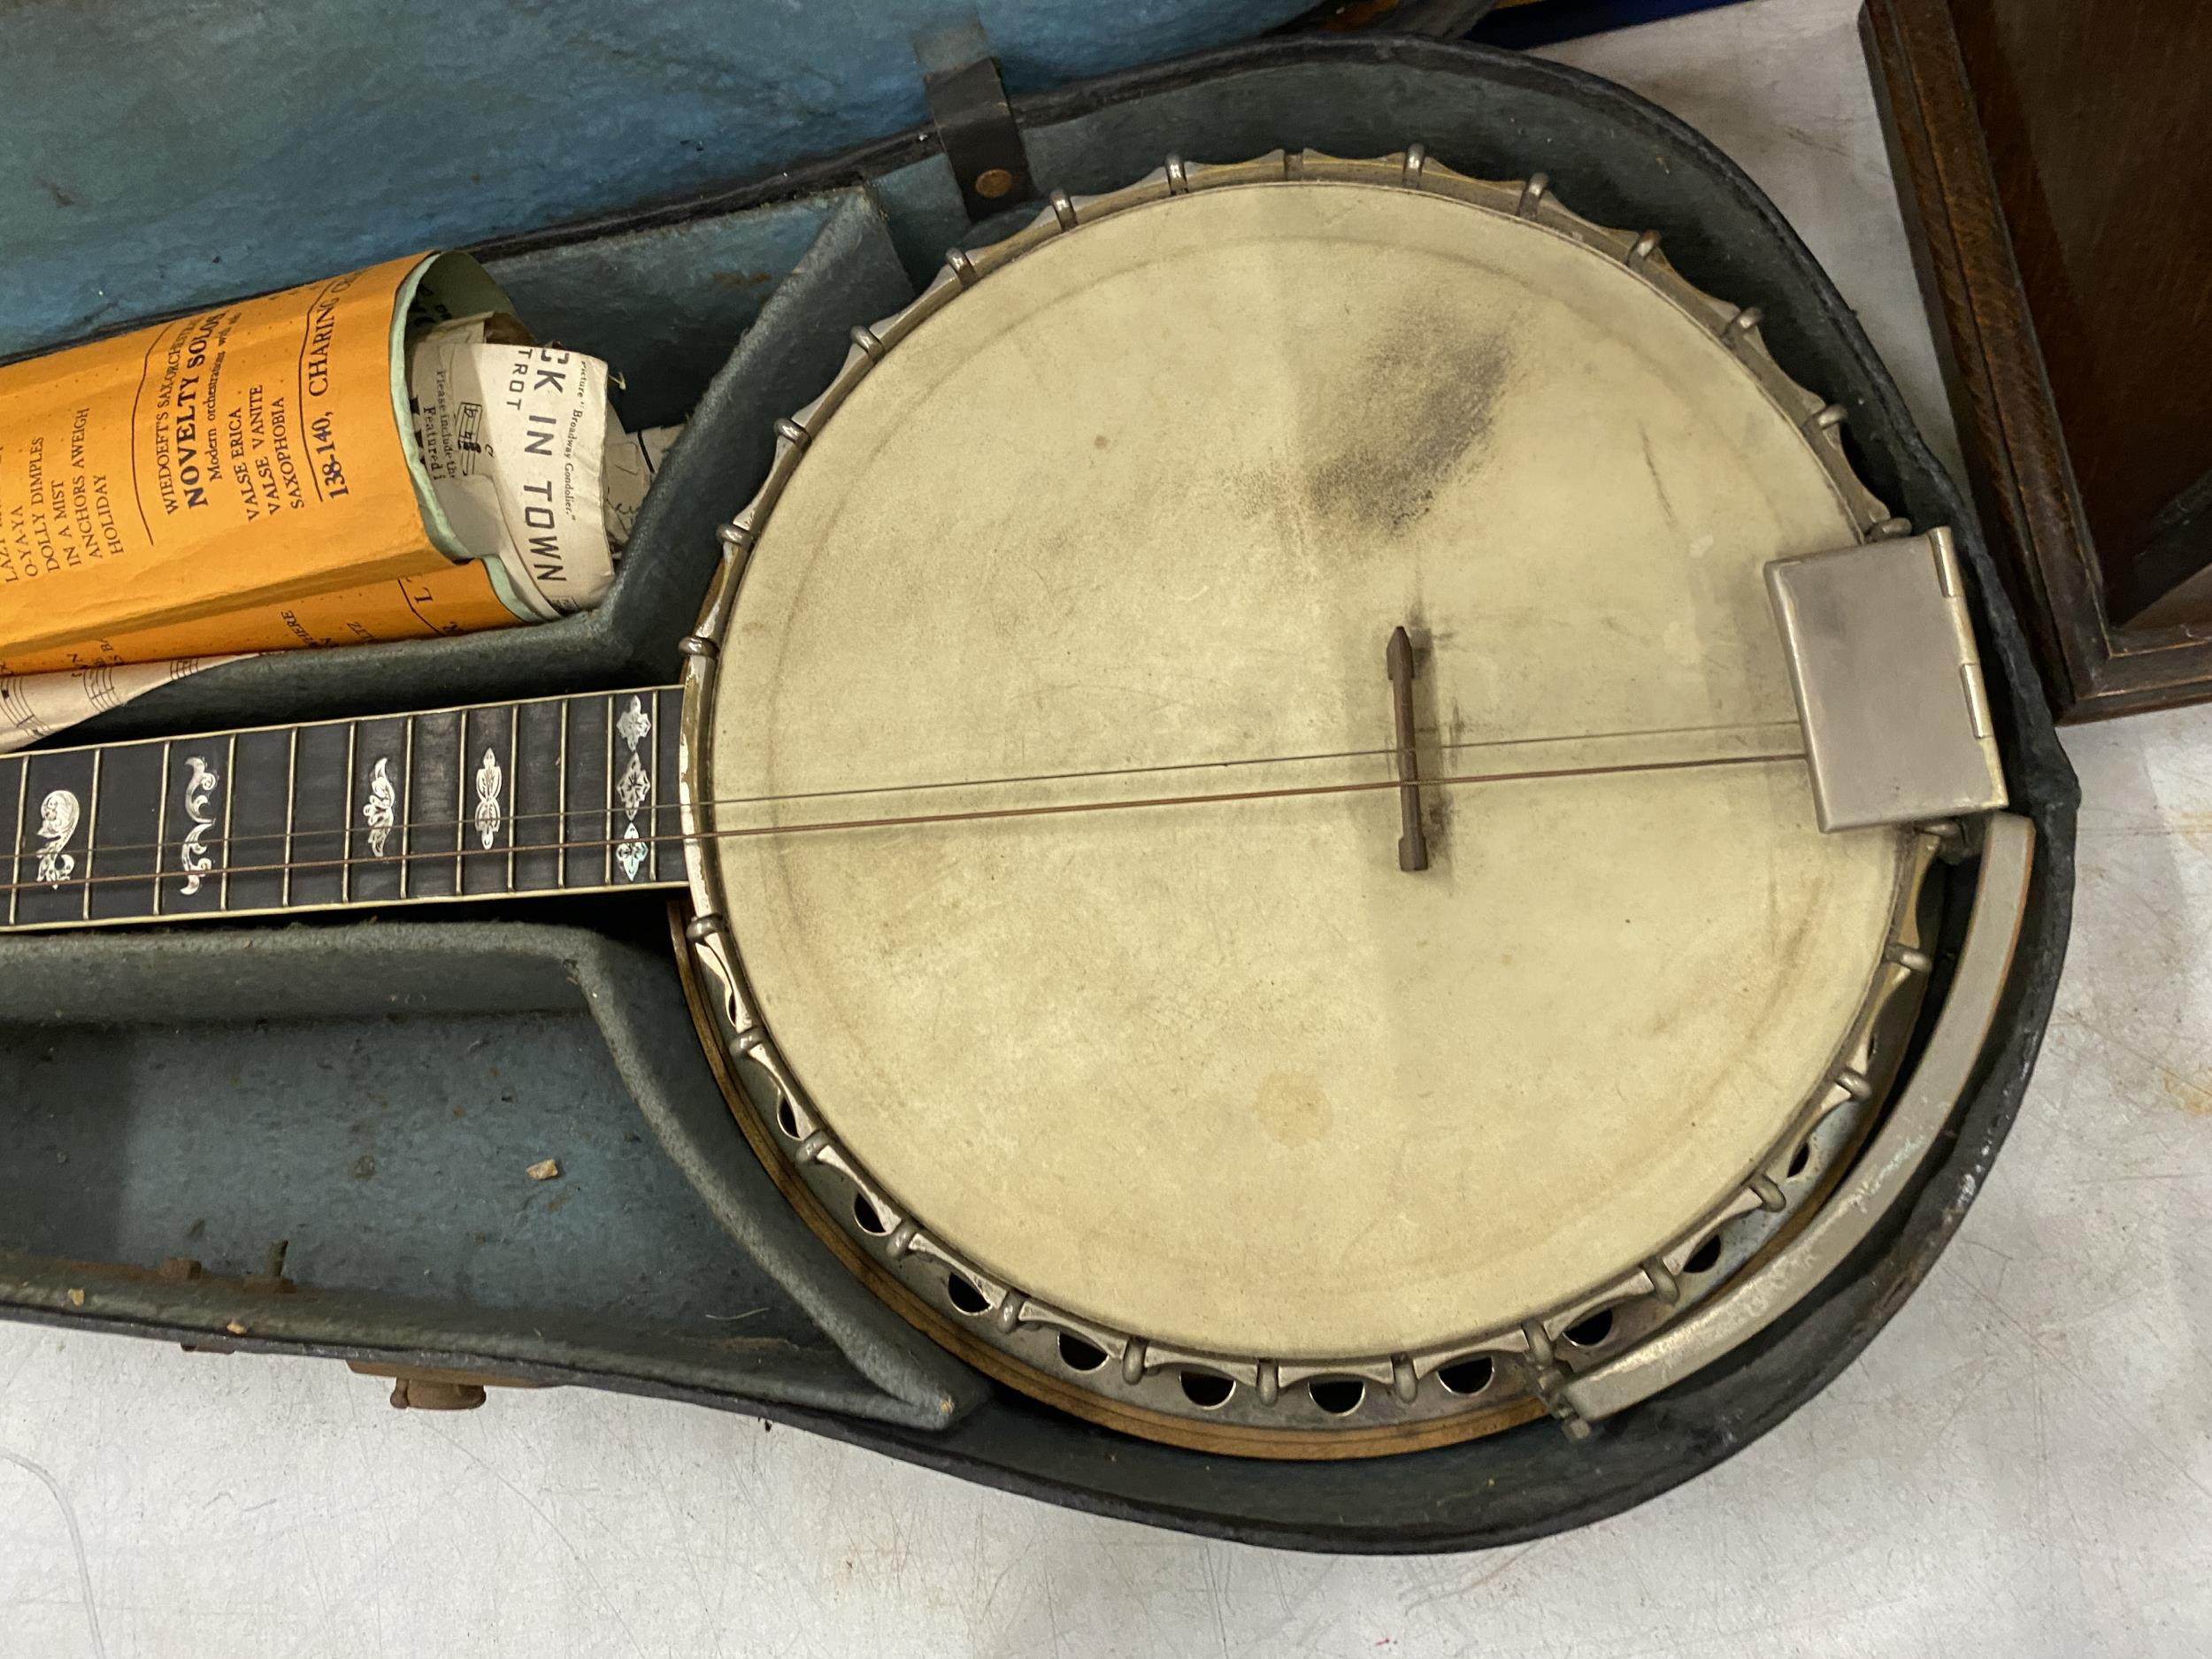 A VINTAGE CASED 'PARAGON' BANJO WITH MOTHER OF PEARL FRETBOARD - Image 2 of 5